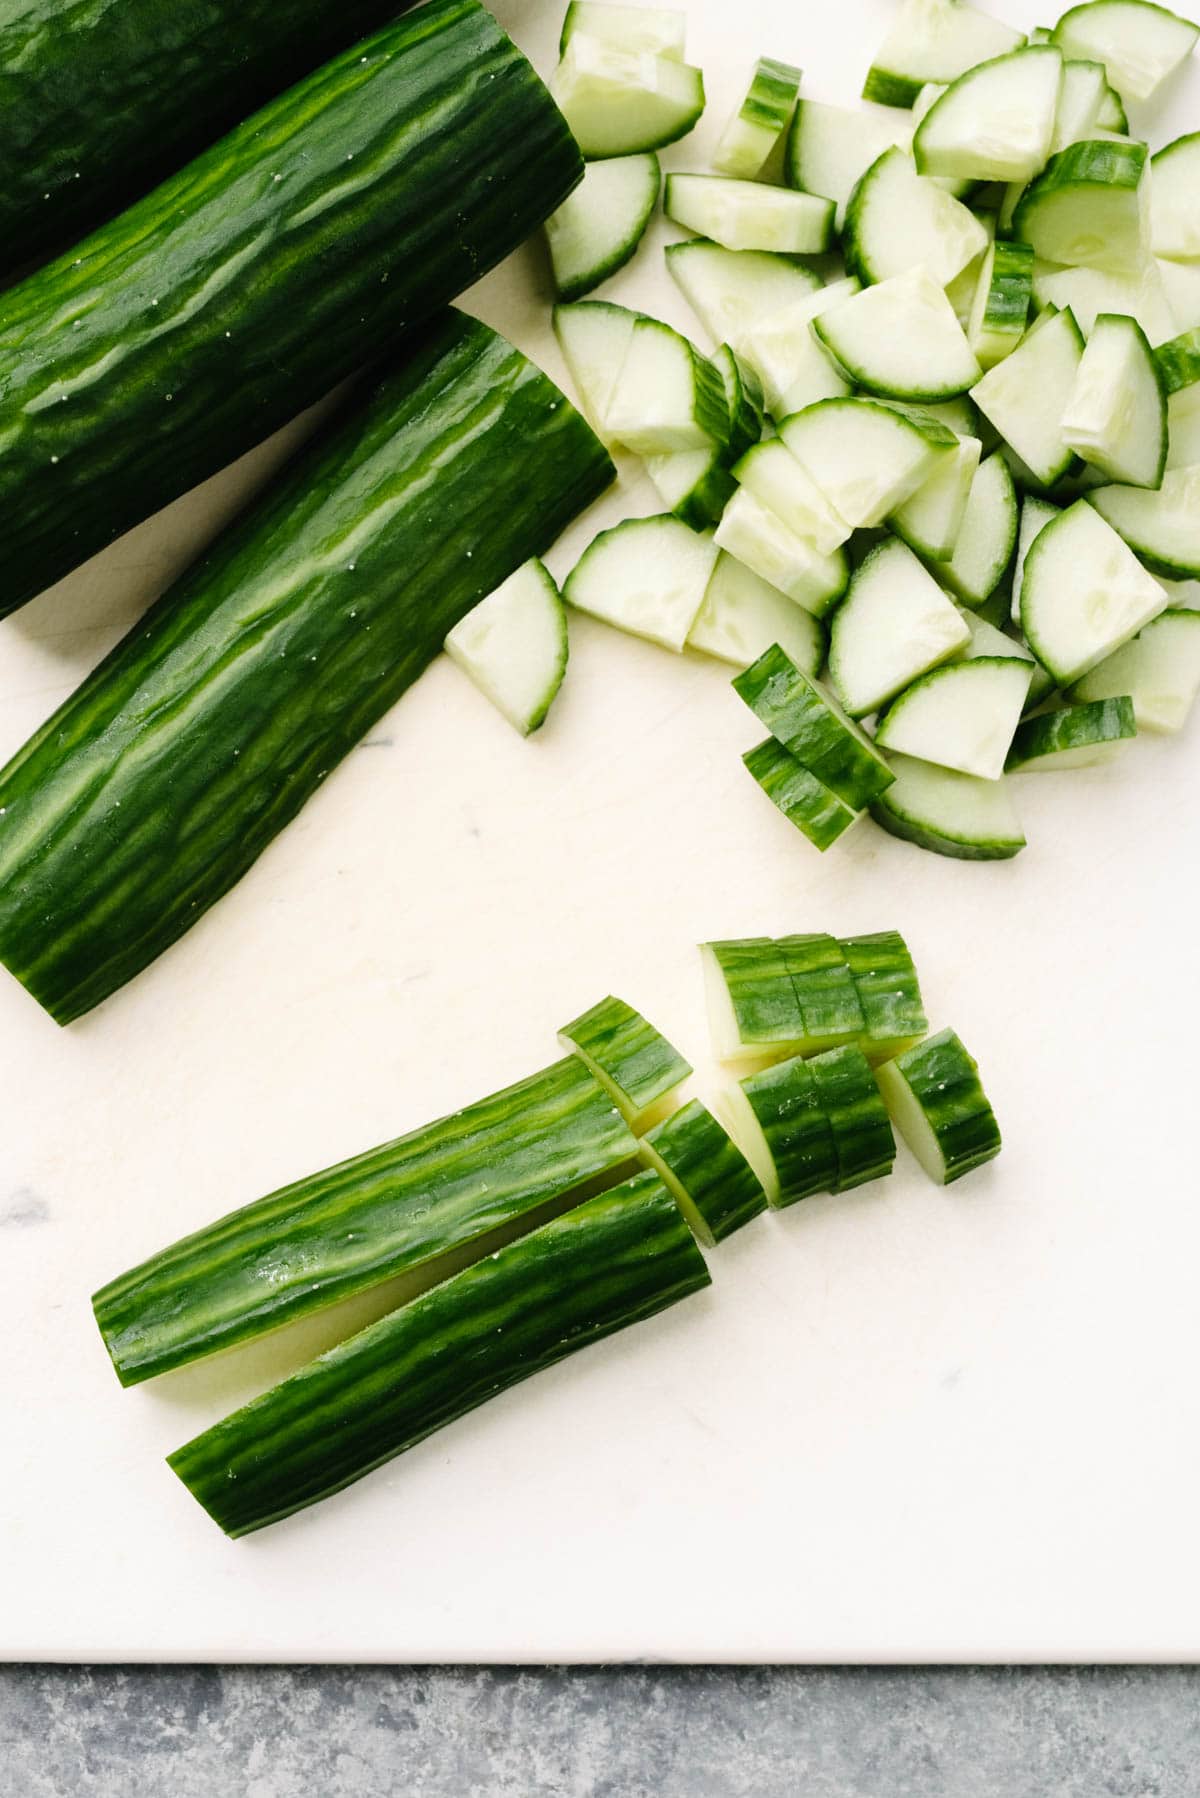 English cucumbers divided into quarters and then thinly sliced on a white cutting board.